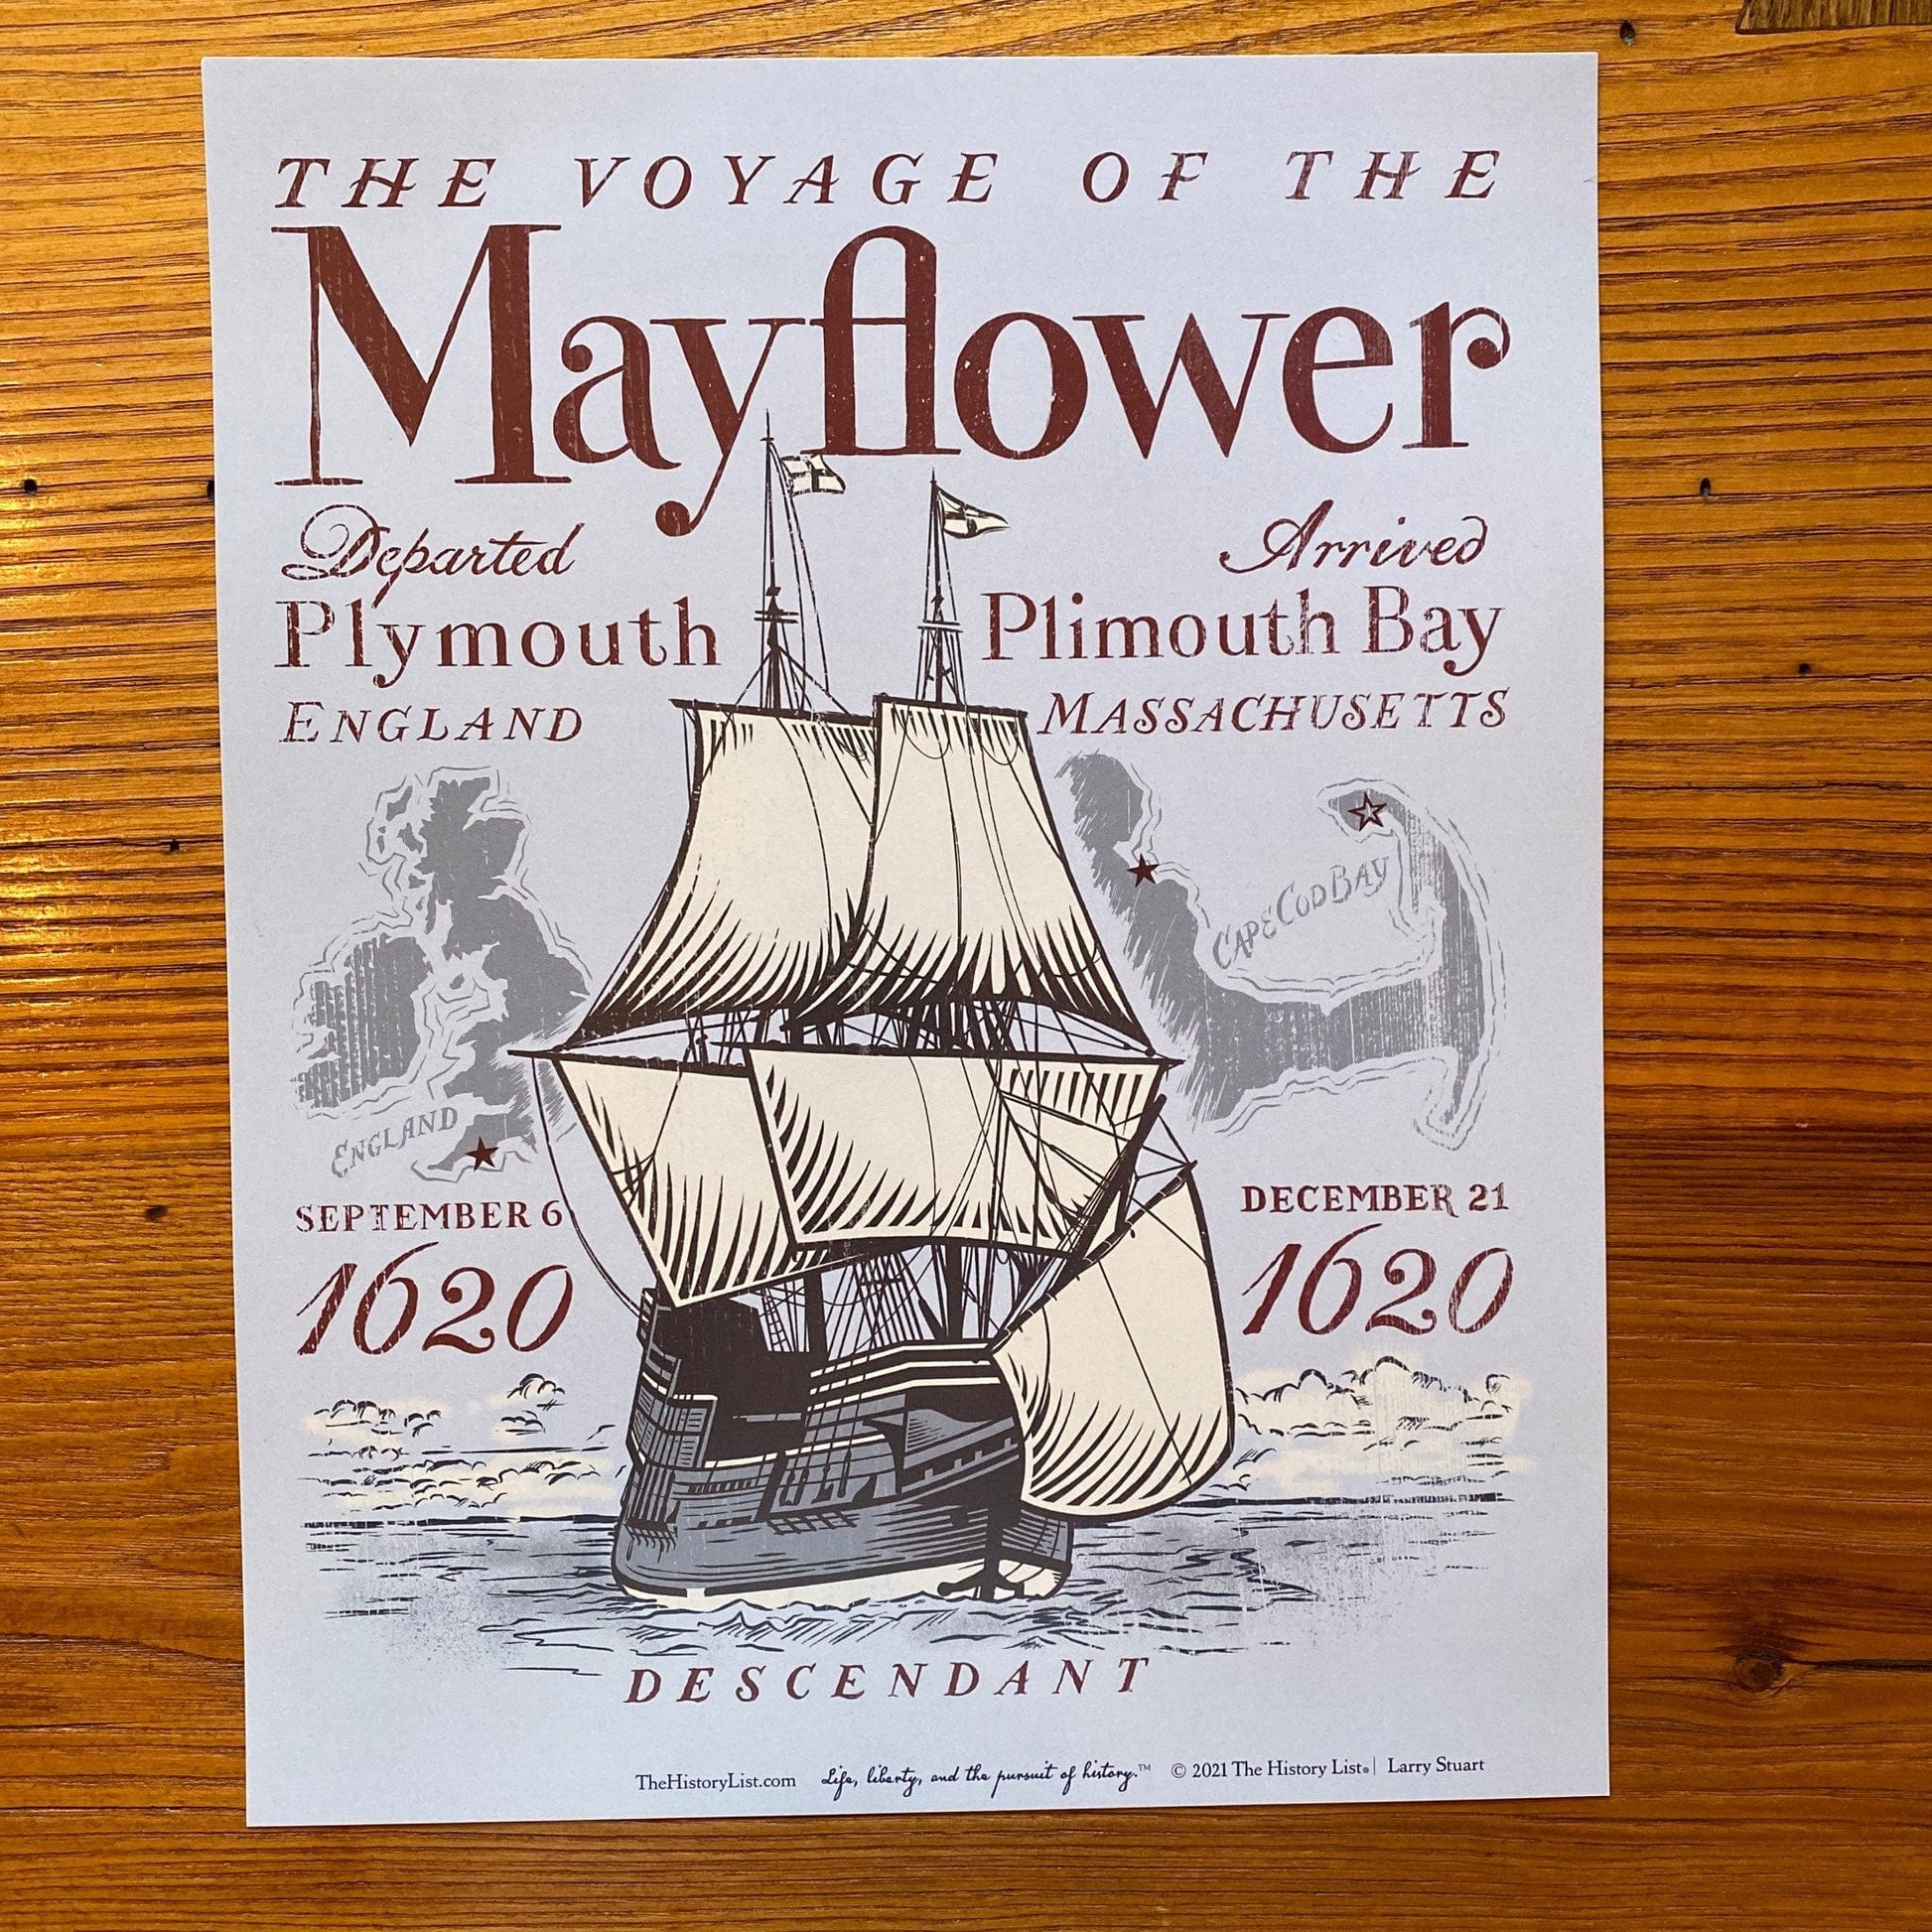 Full view: "The Voyage of the Mayflower" as a small poster from the History List Store